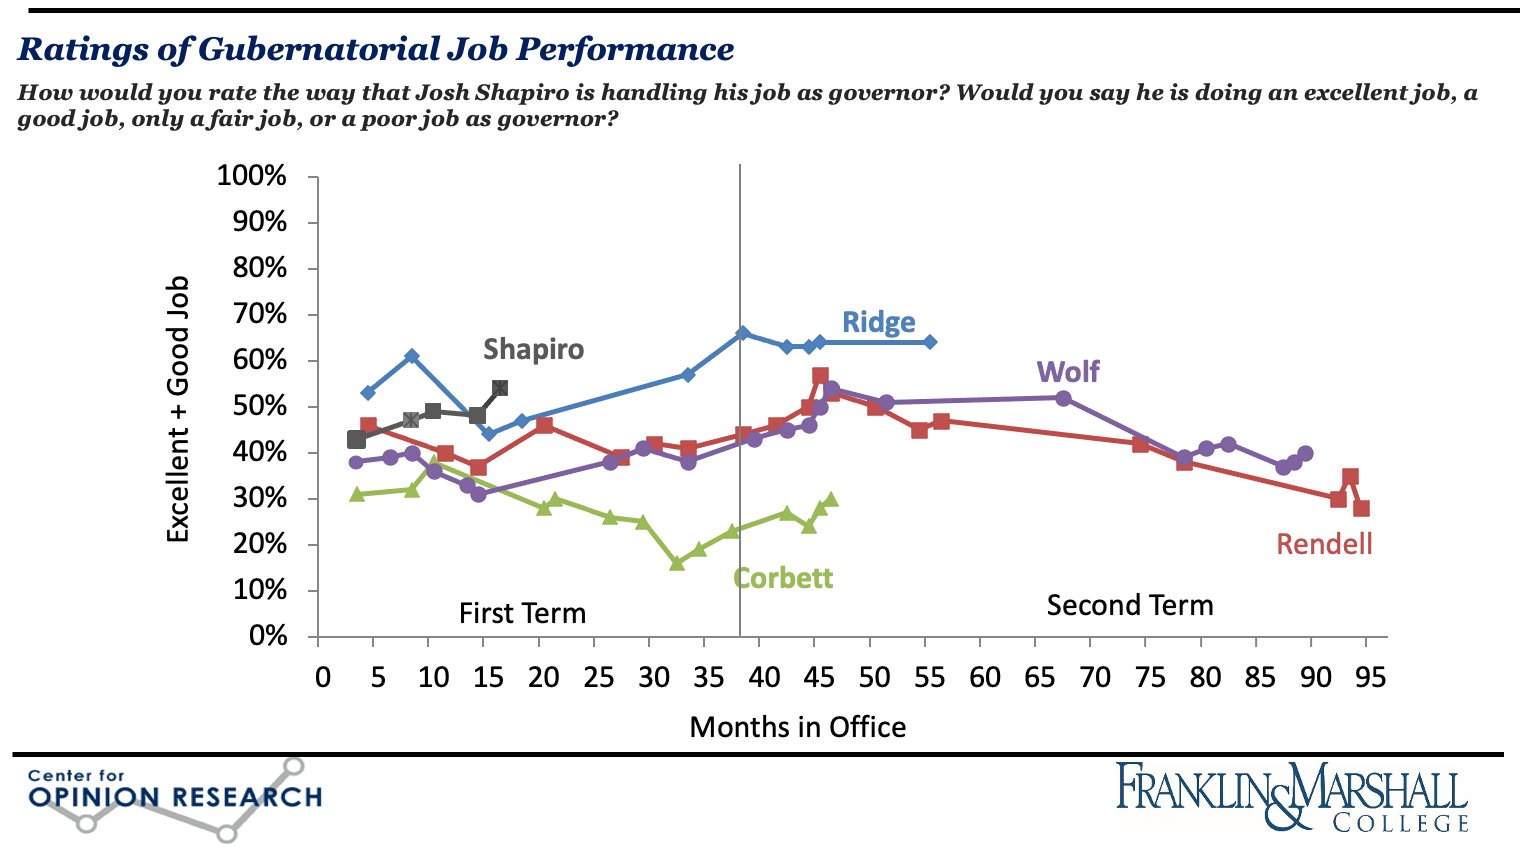 Figure 2. LIne graph showing F&M Poll data on recent Pennsylvania governors' job approval ratings, January 1995 through April 2024. Governors included are Ridge, Rendell, Corbett, Wolf, and Shapiro.